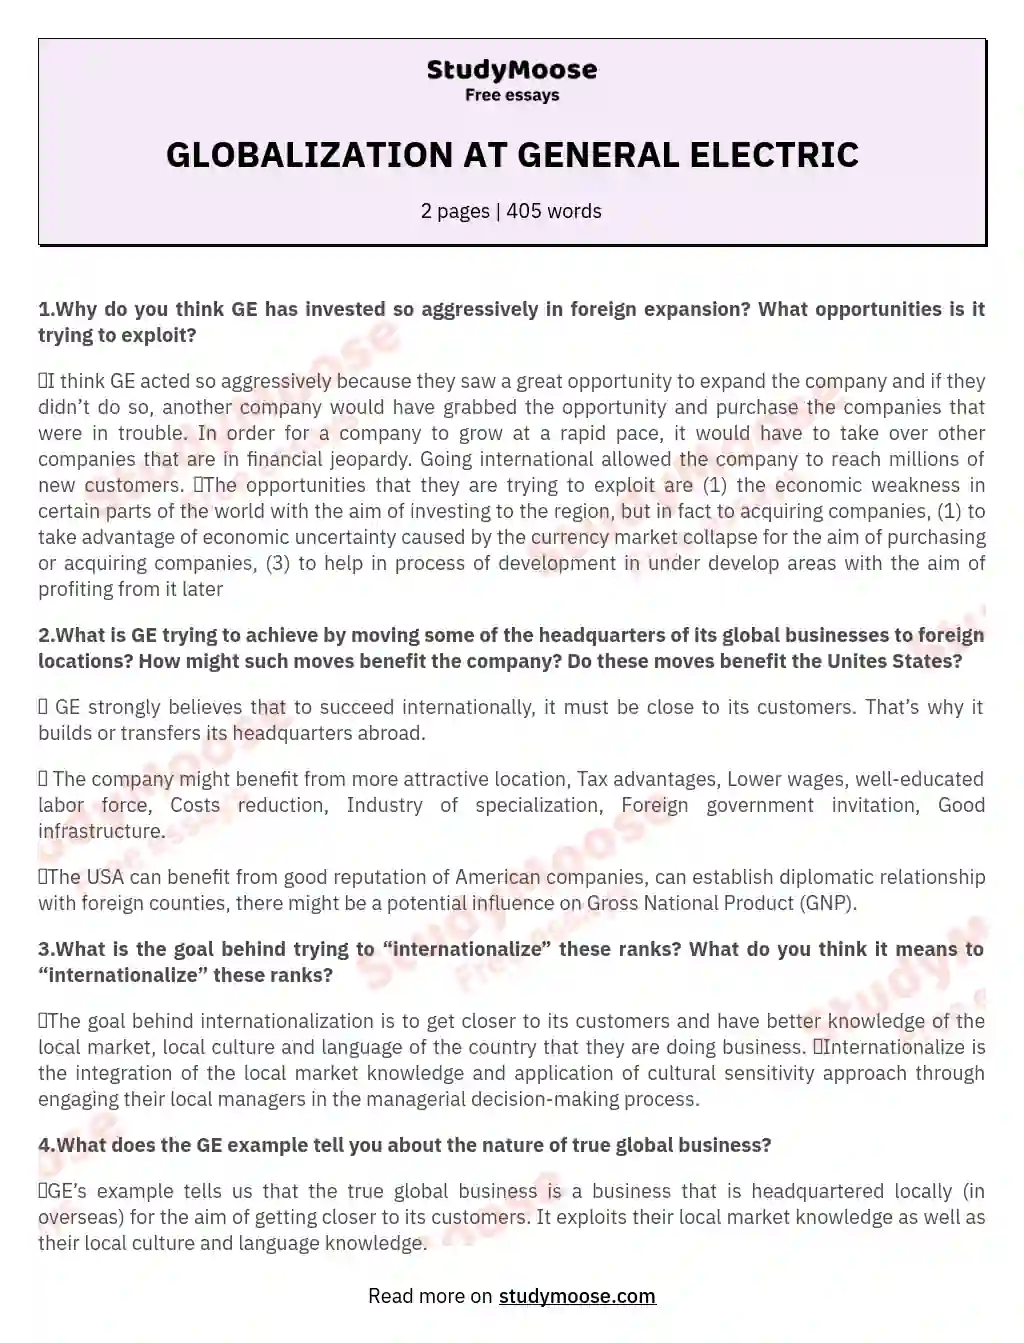 GLOBALIZATION AT GENERAL ELECTRIC essay